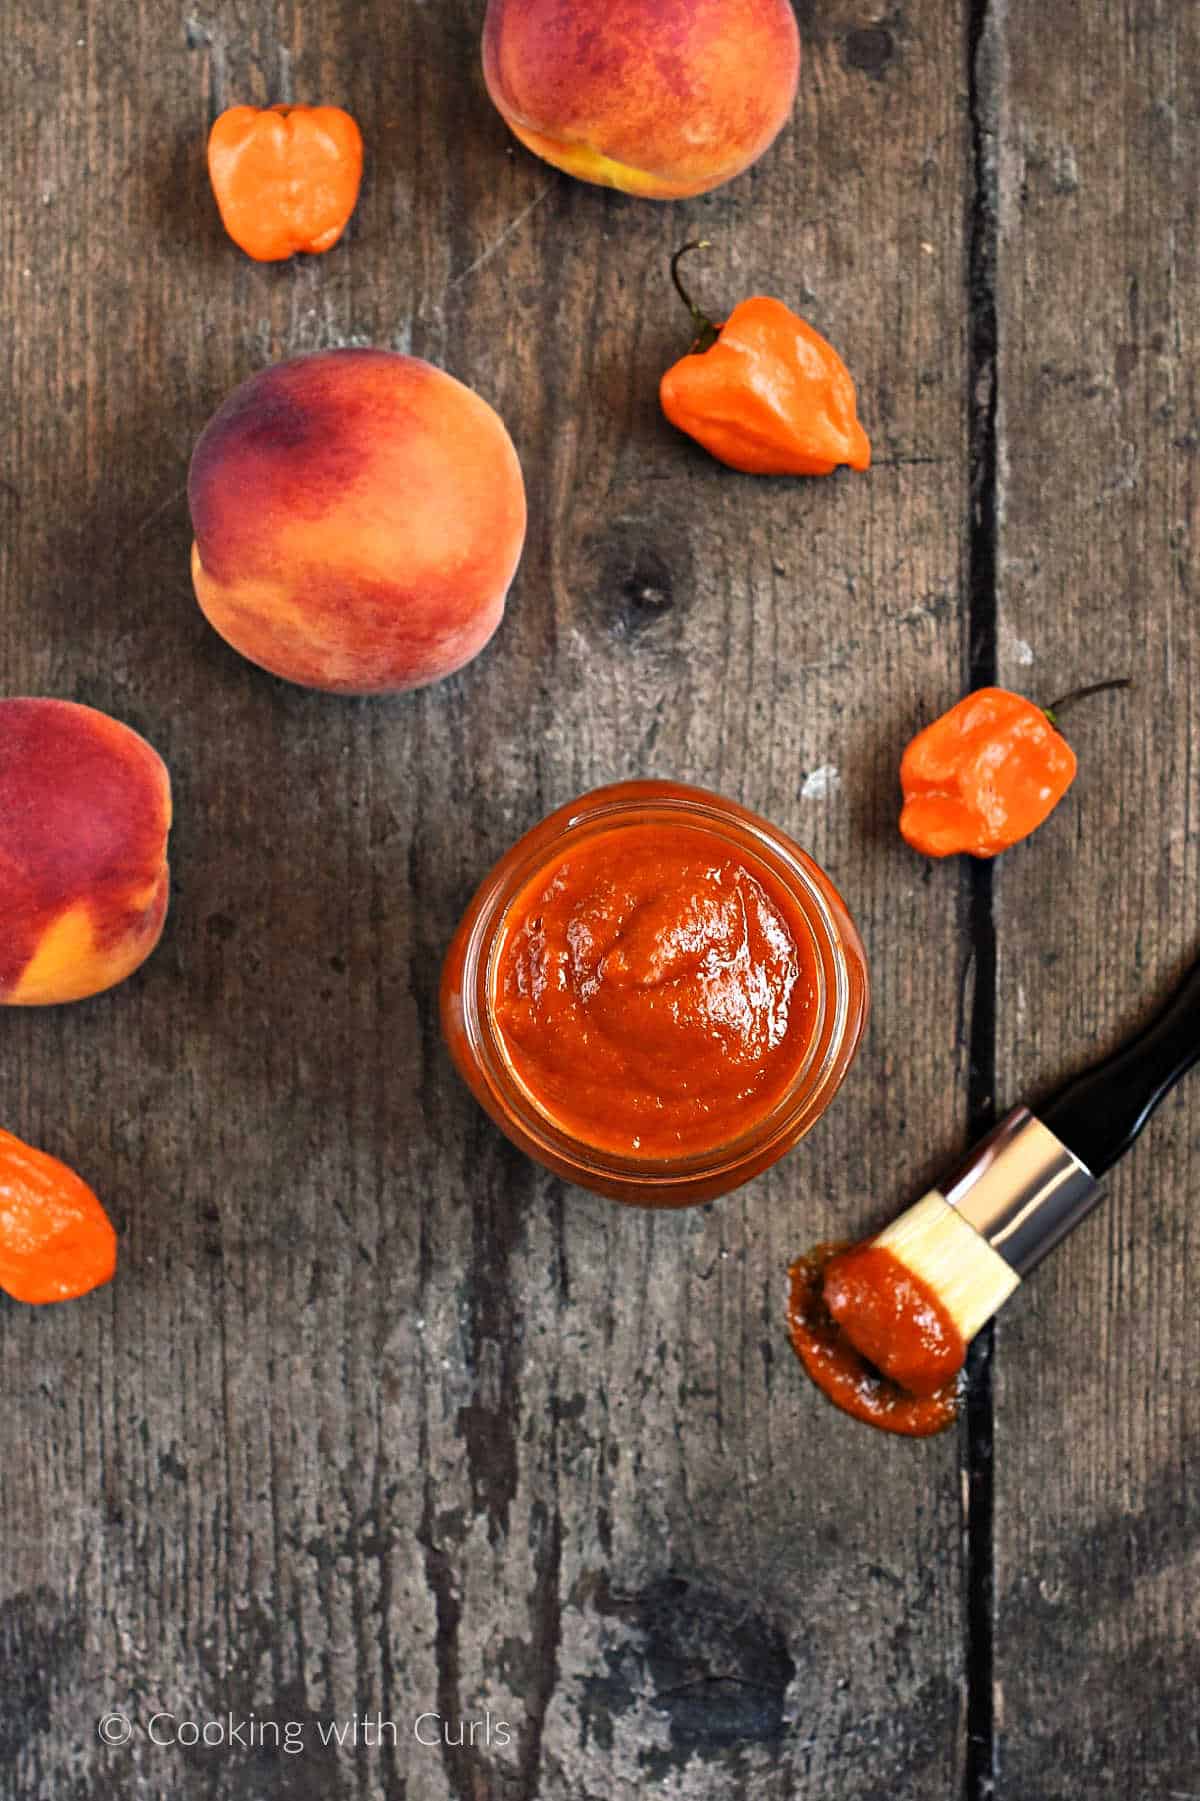 Looking down on a jar of peach habanero barbecue sauce surrounded by peaches and orange peppers.